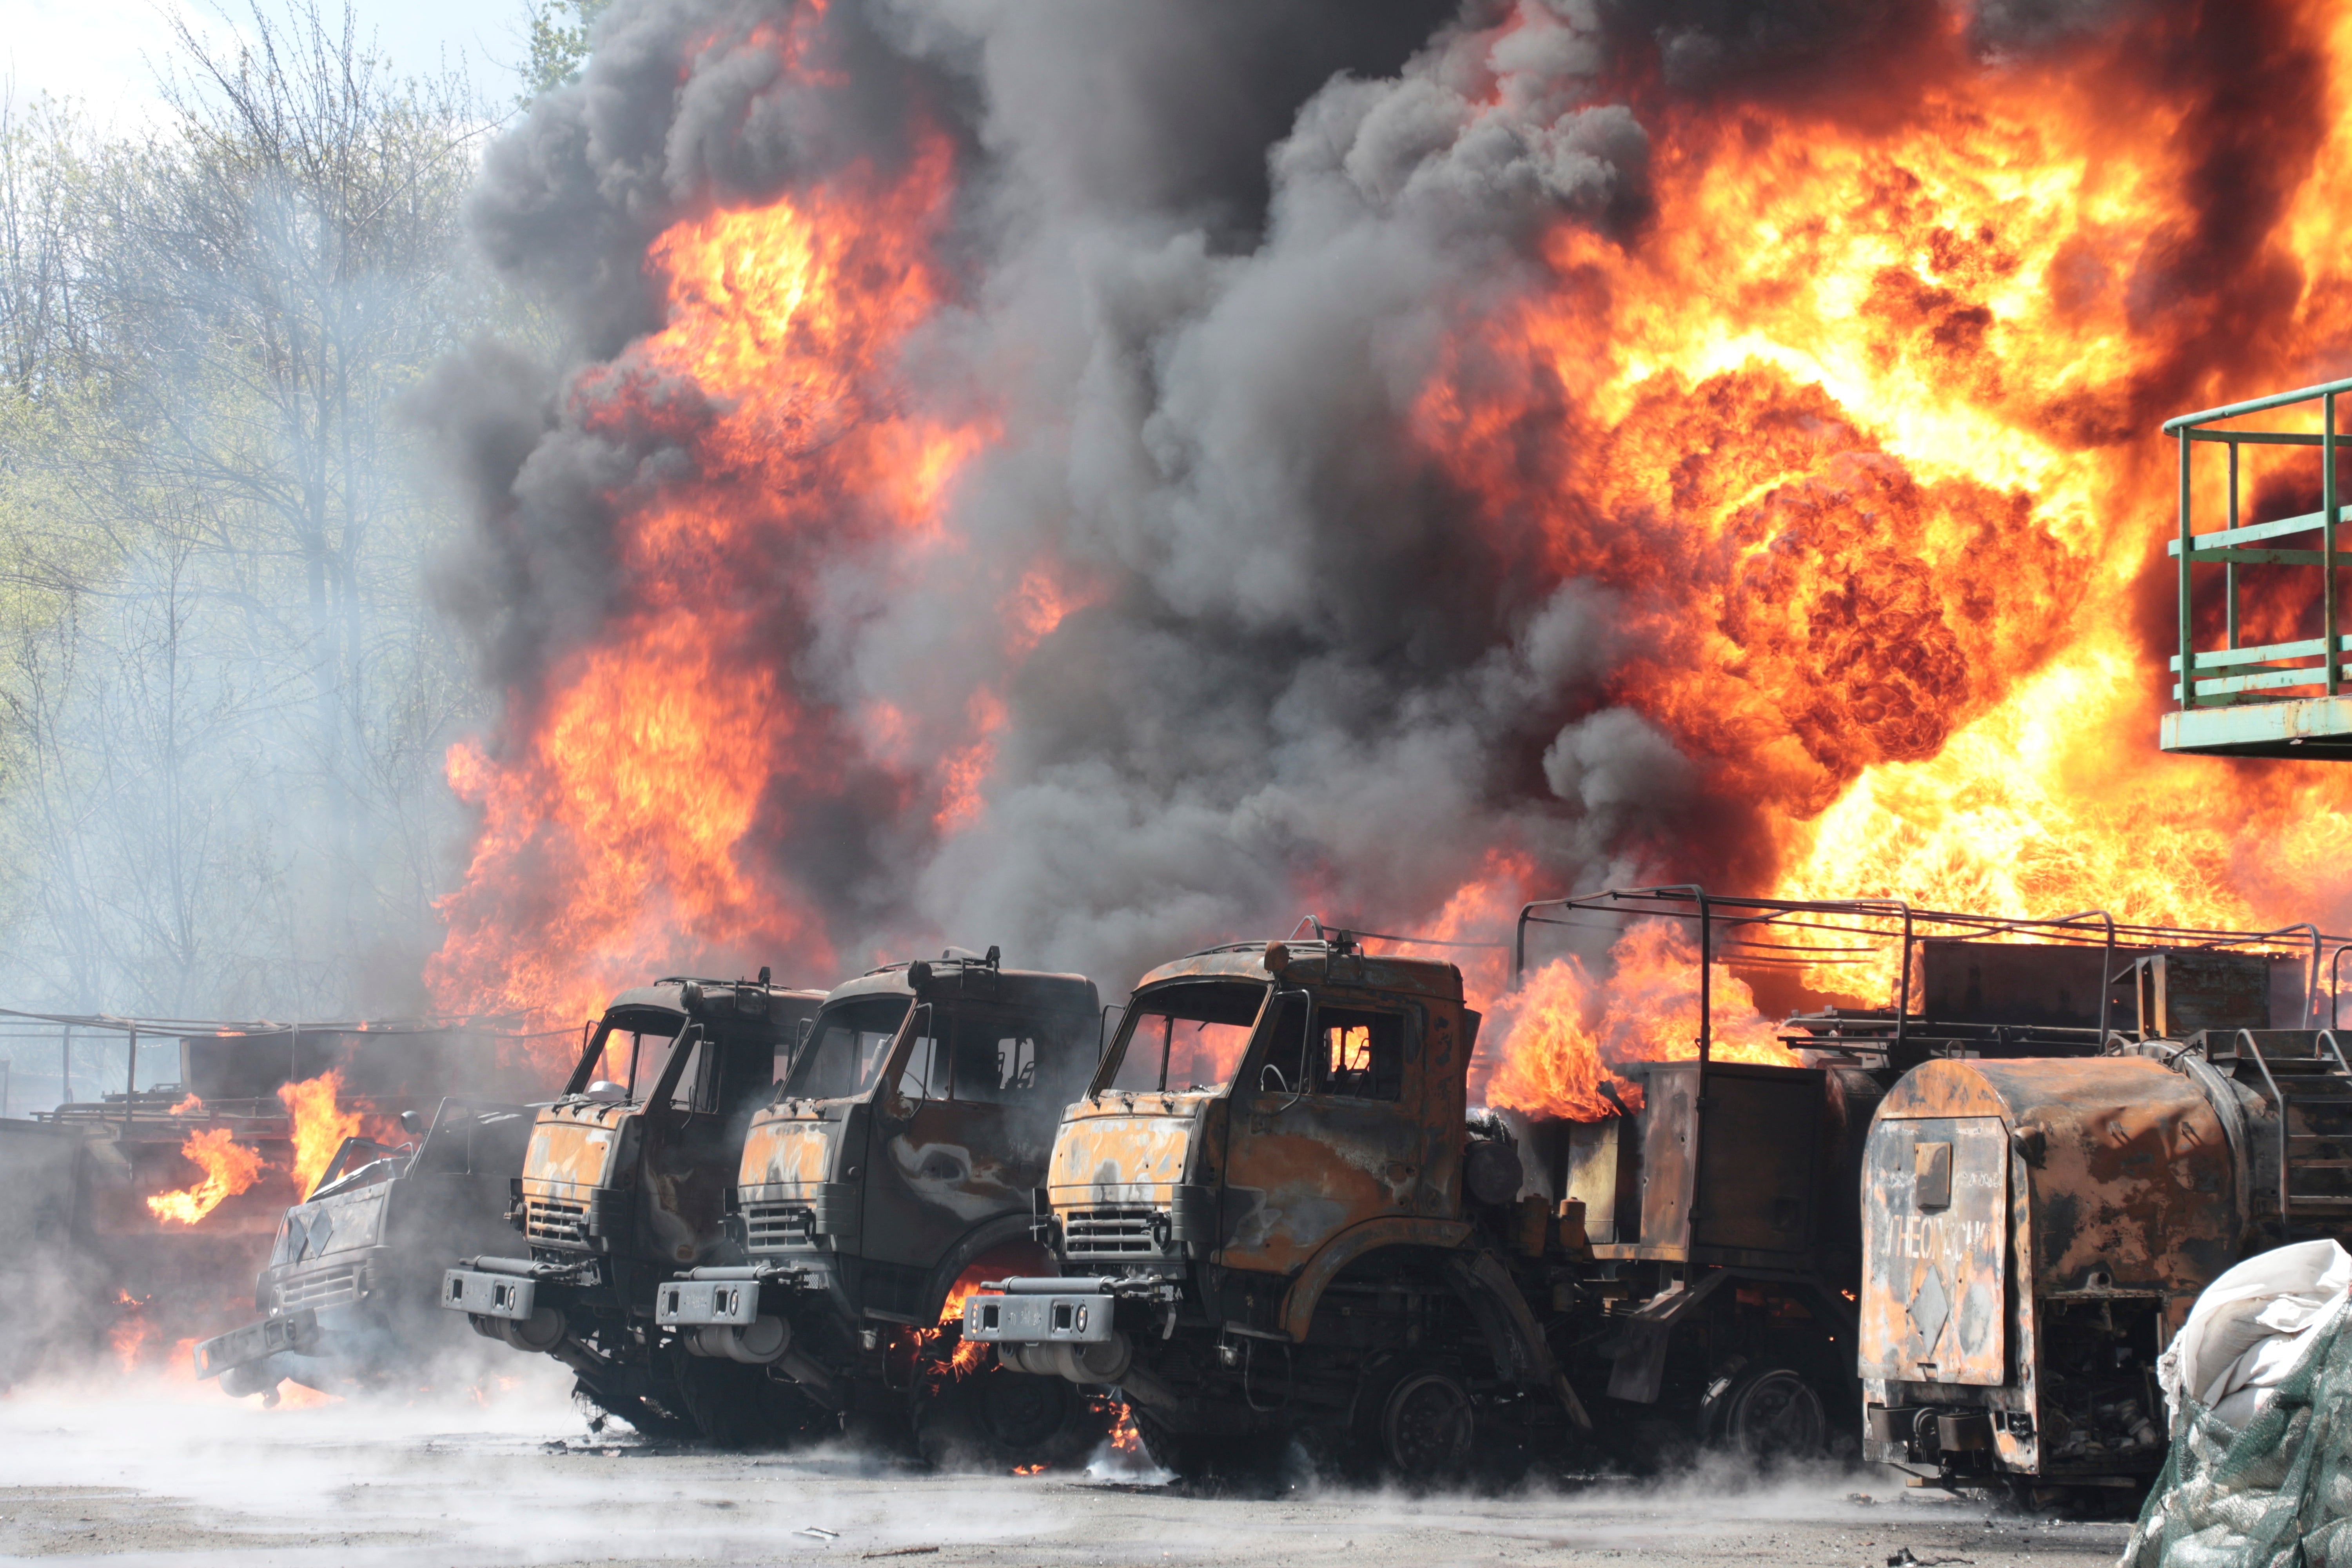 Vehicles on fire at an oil depot in eastern Ukraine